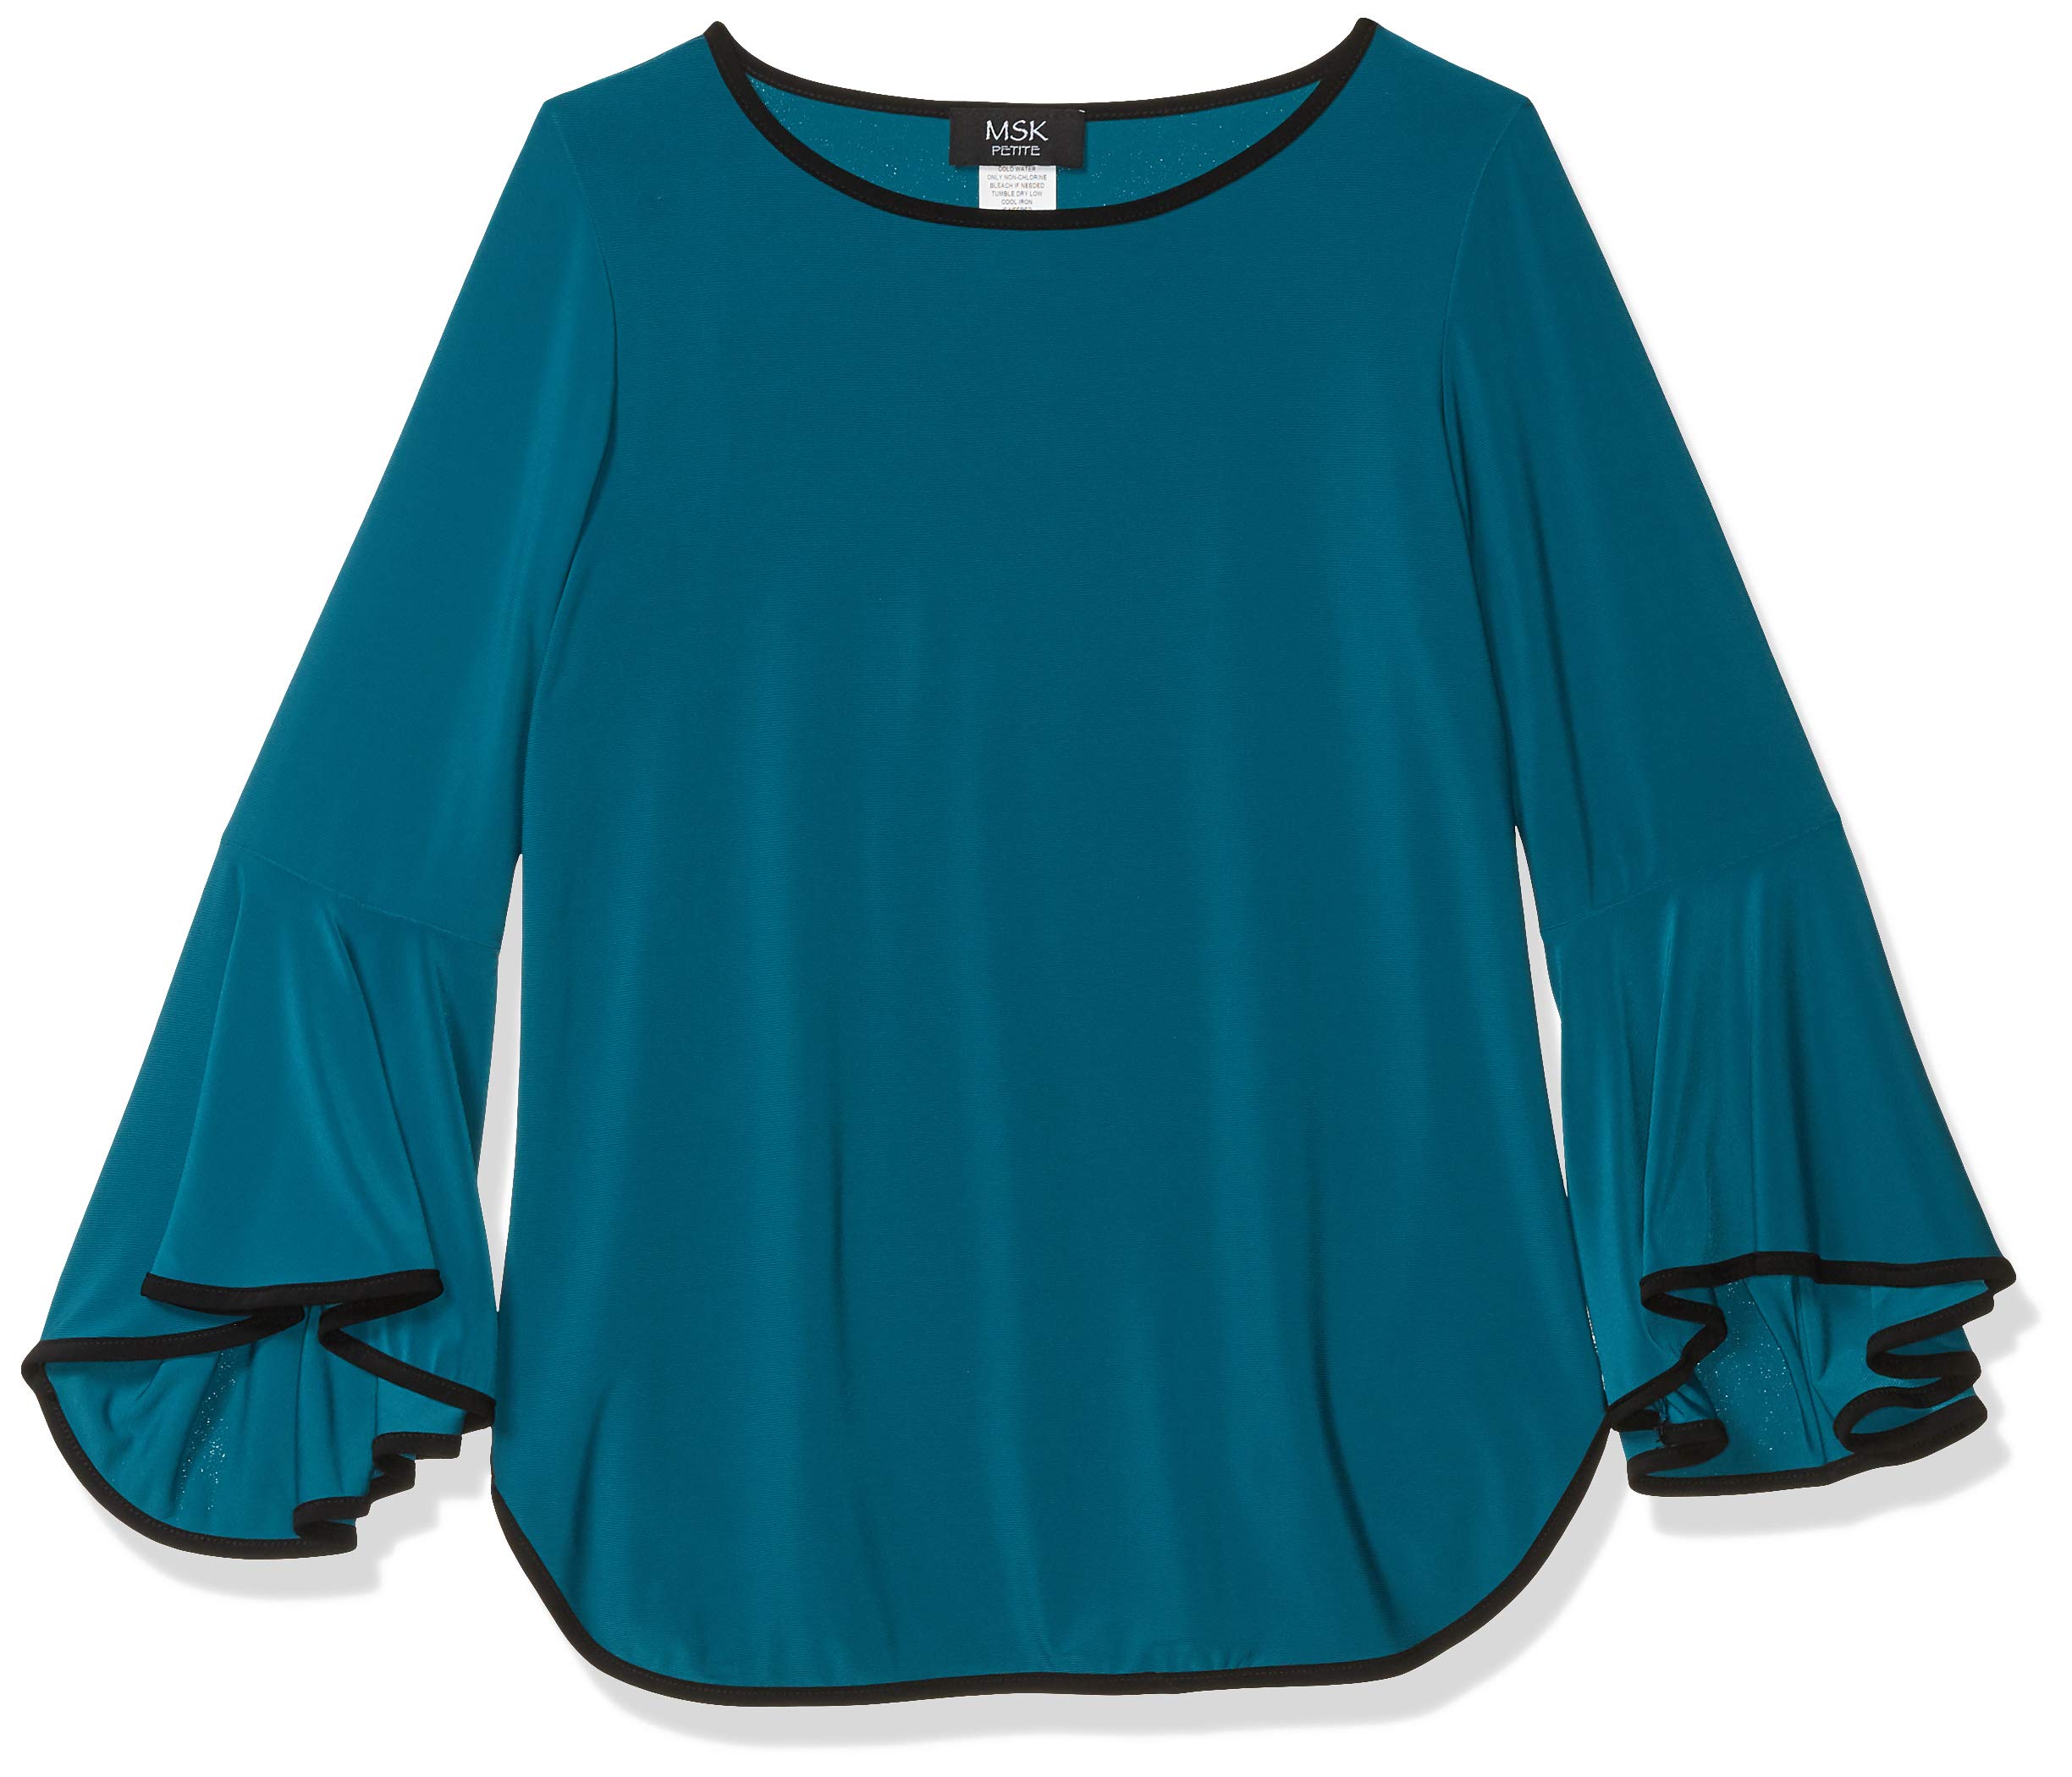 MSK Women's Bell Sleeve Top with Piping